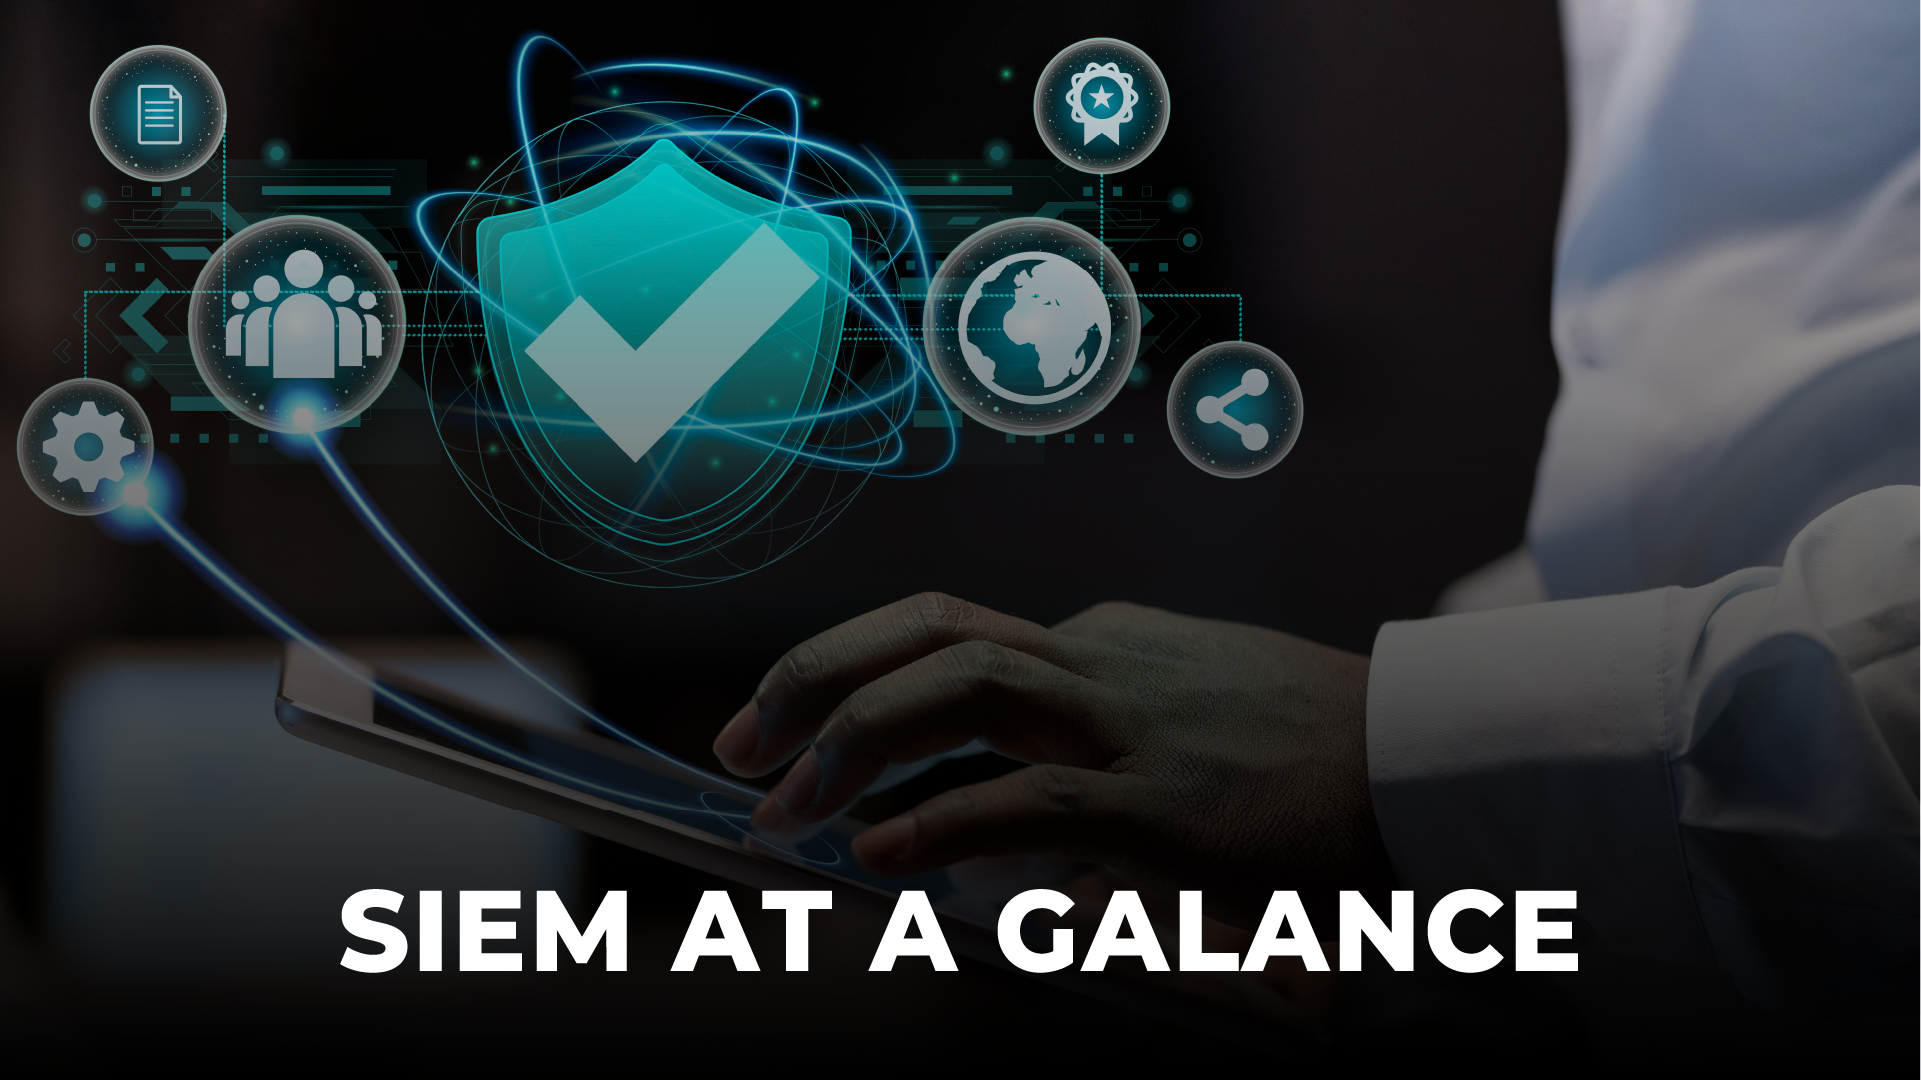 SIEM at a glance (Security information and event management)